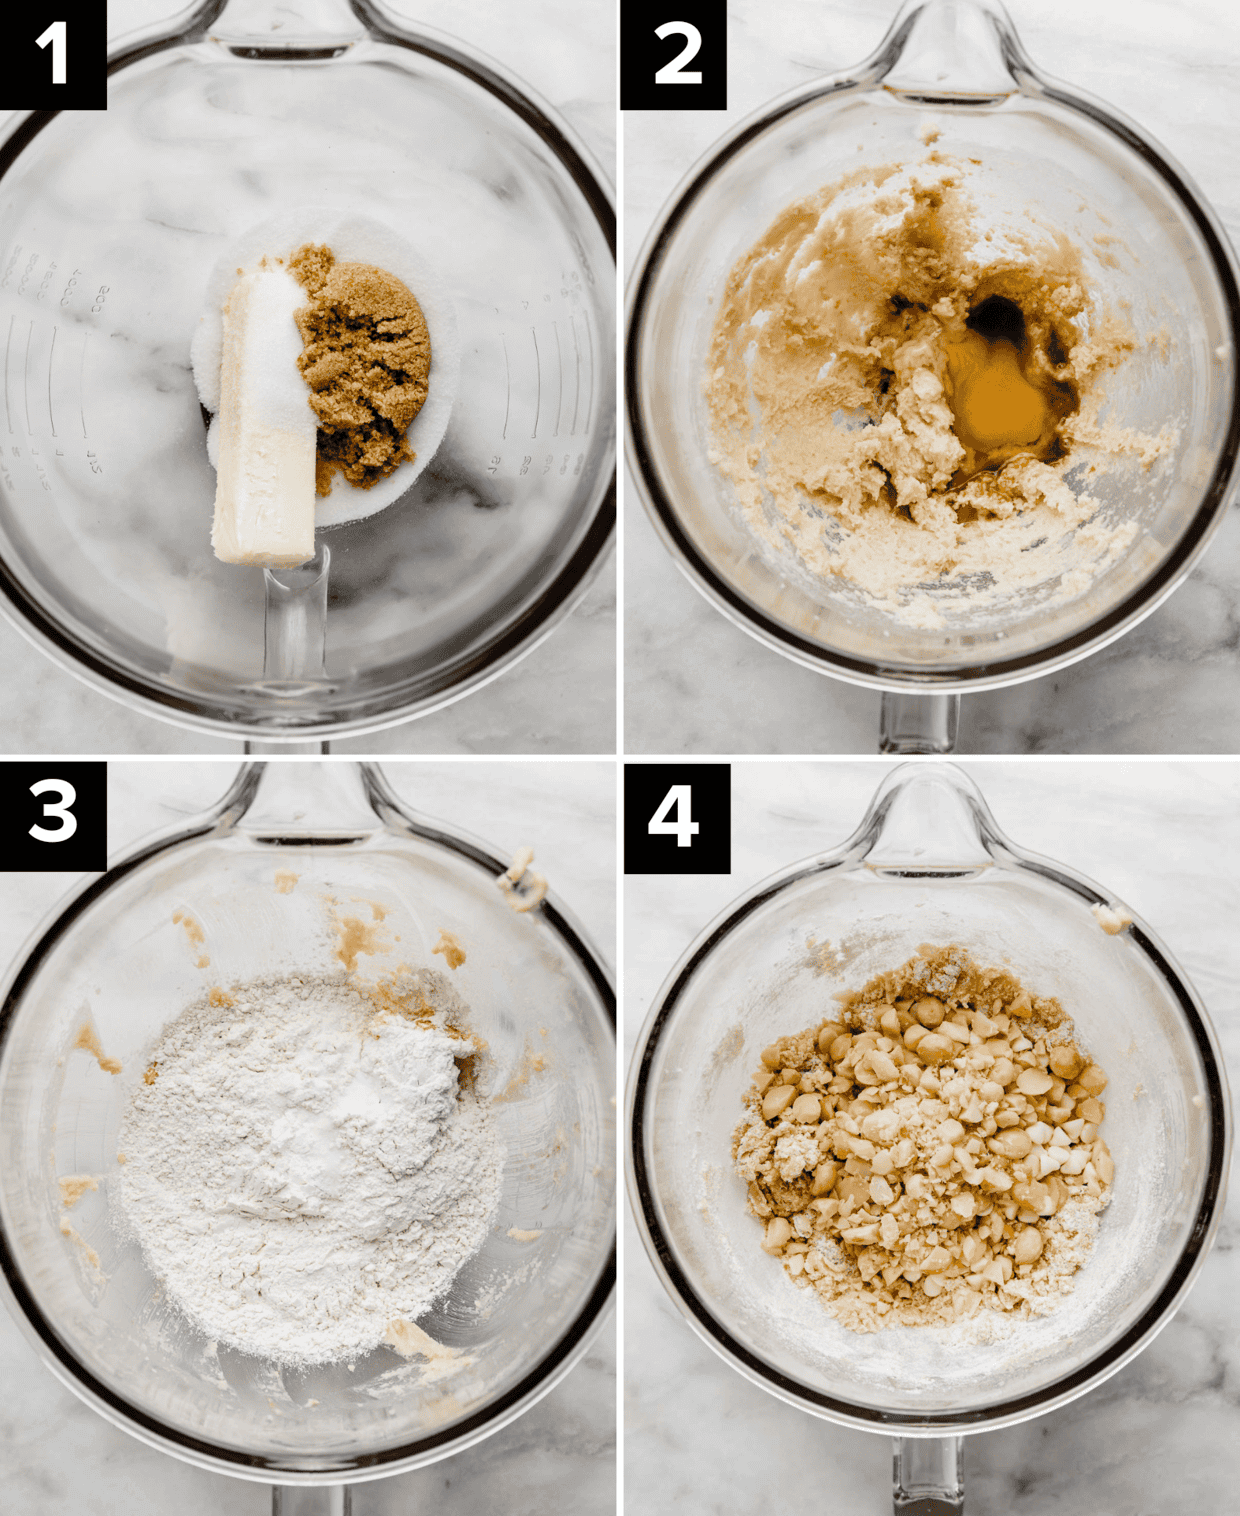 Four photos showing the process of how to make White Chocolate Macadamia Nut Cookies, each photo has a glass mixing bowl and ingredients are added in each photo: butter and sugar, egg and vanilla, flour, macadamia nuts and white chocolate.